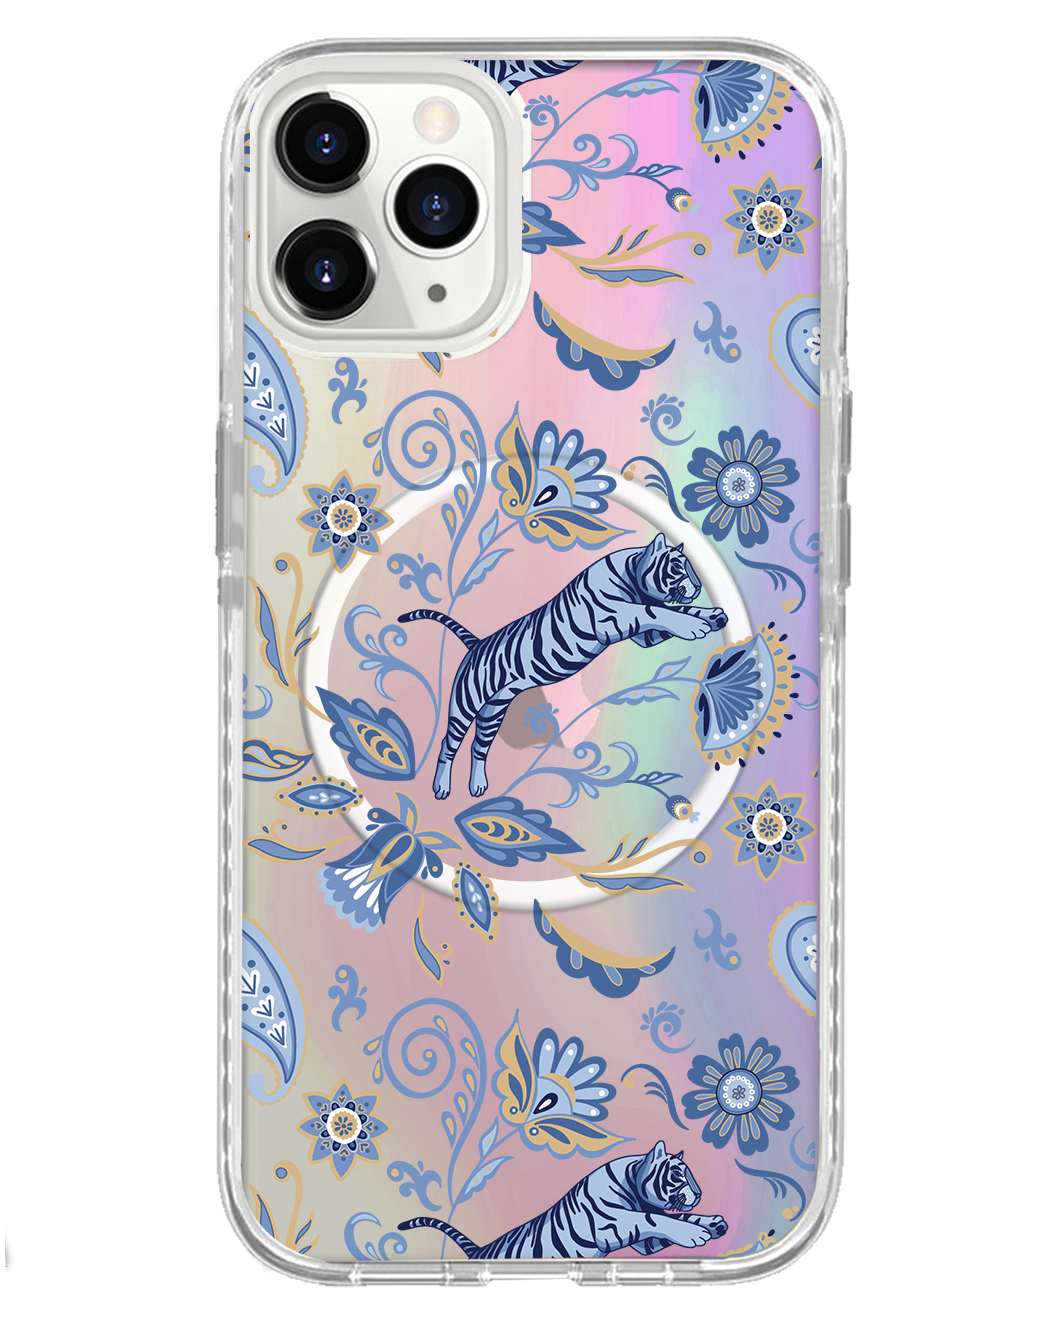 iPhone Rearguard Holo - Tiger & Floral